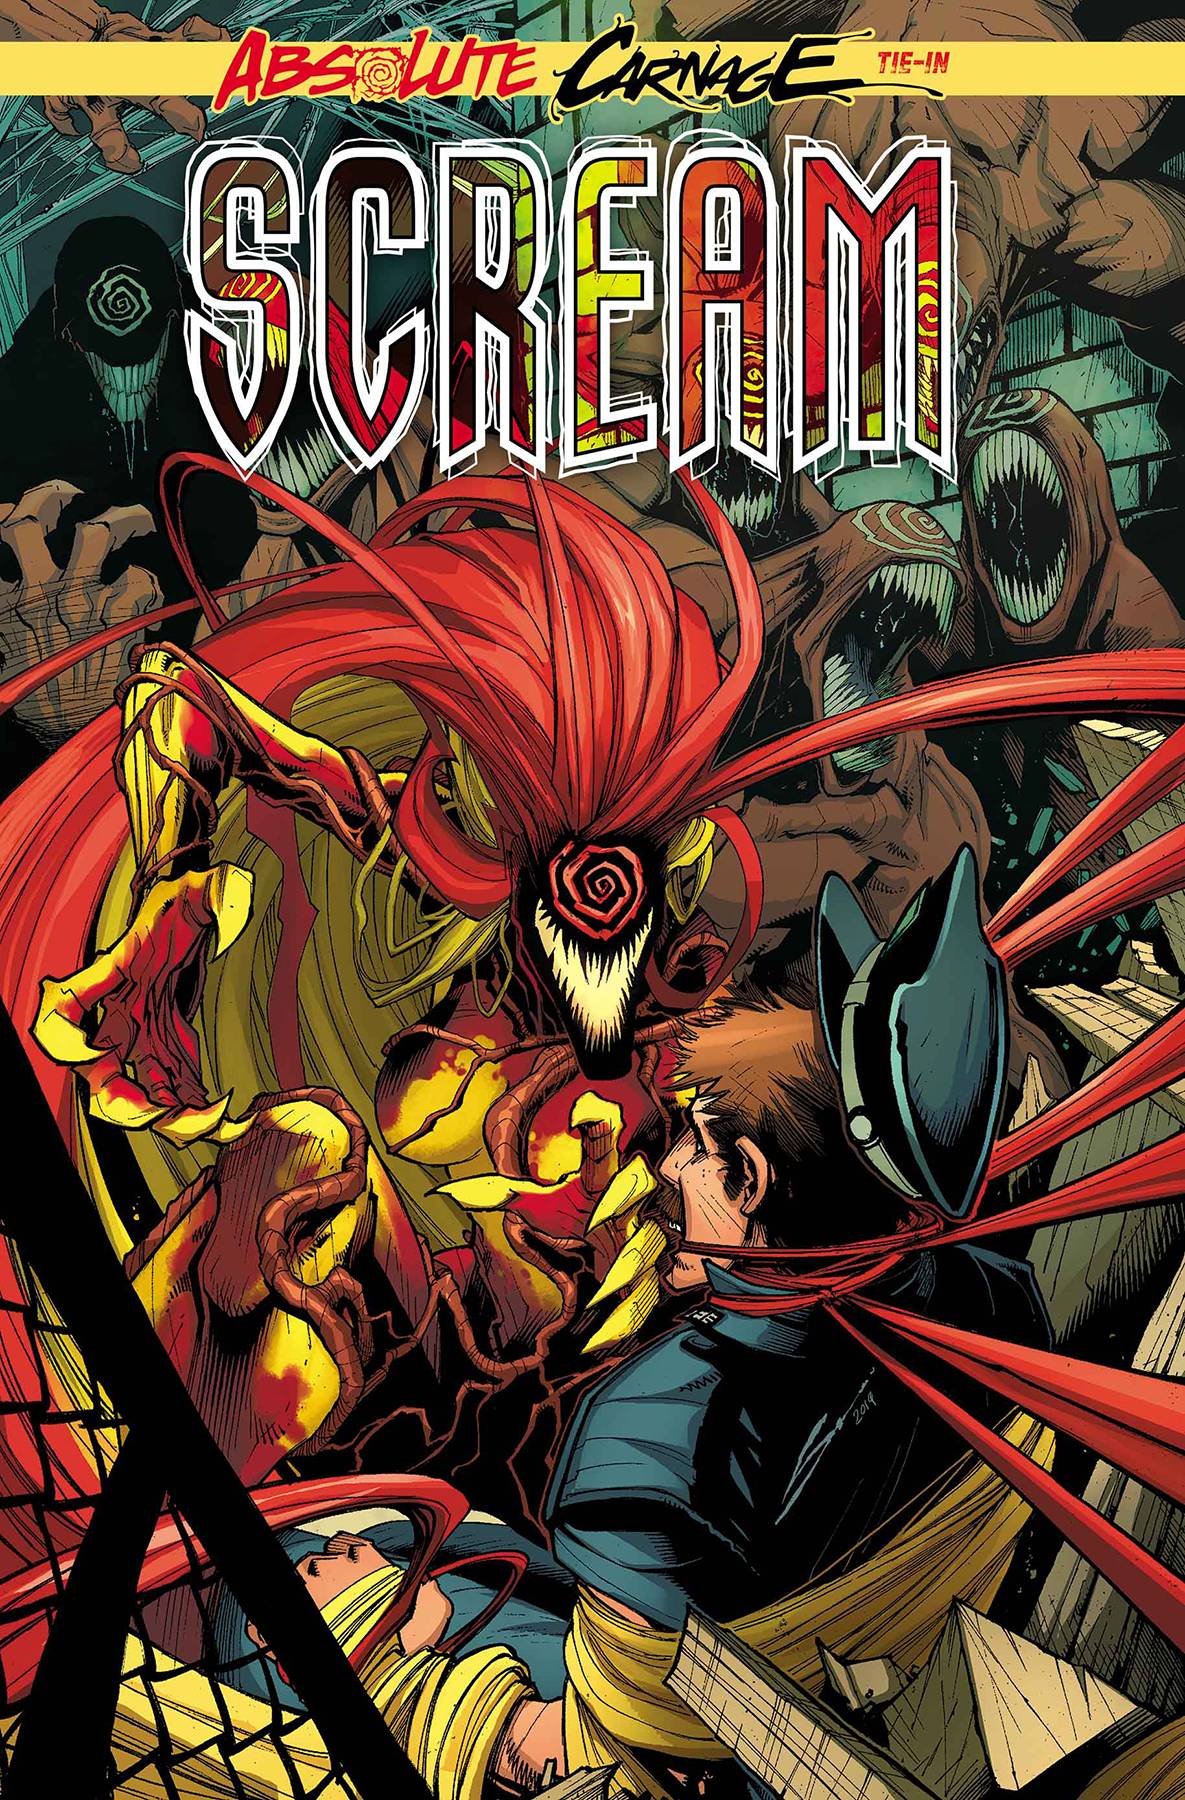 ABSOLUTE CARNAGE SCREAM #2 (OF 3) 09/04/19 FOC 08/12/19